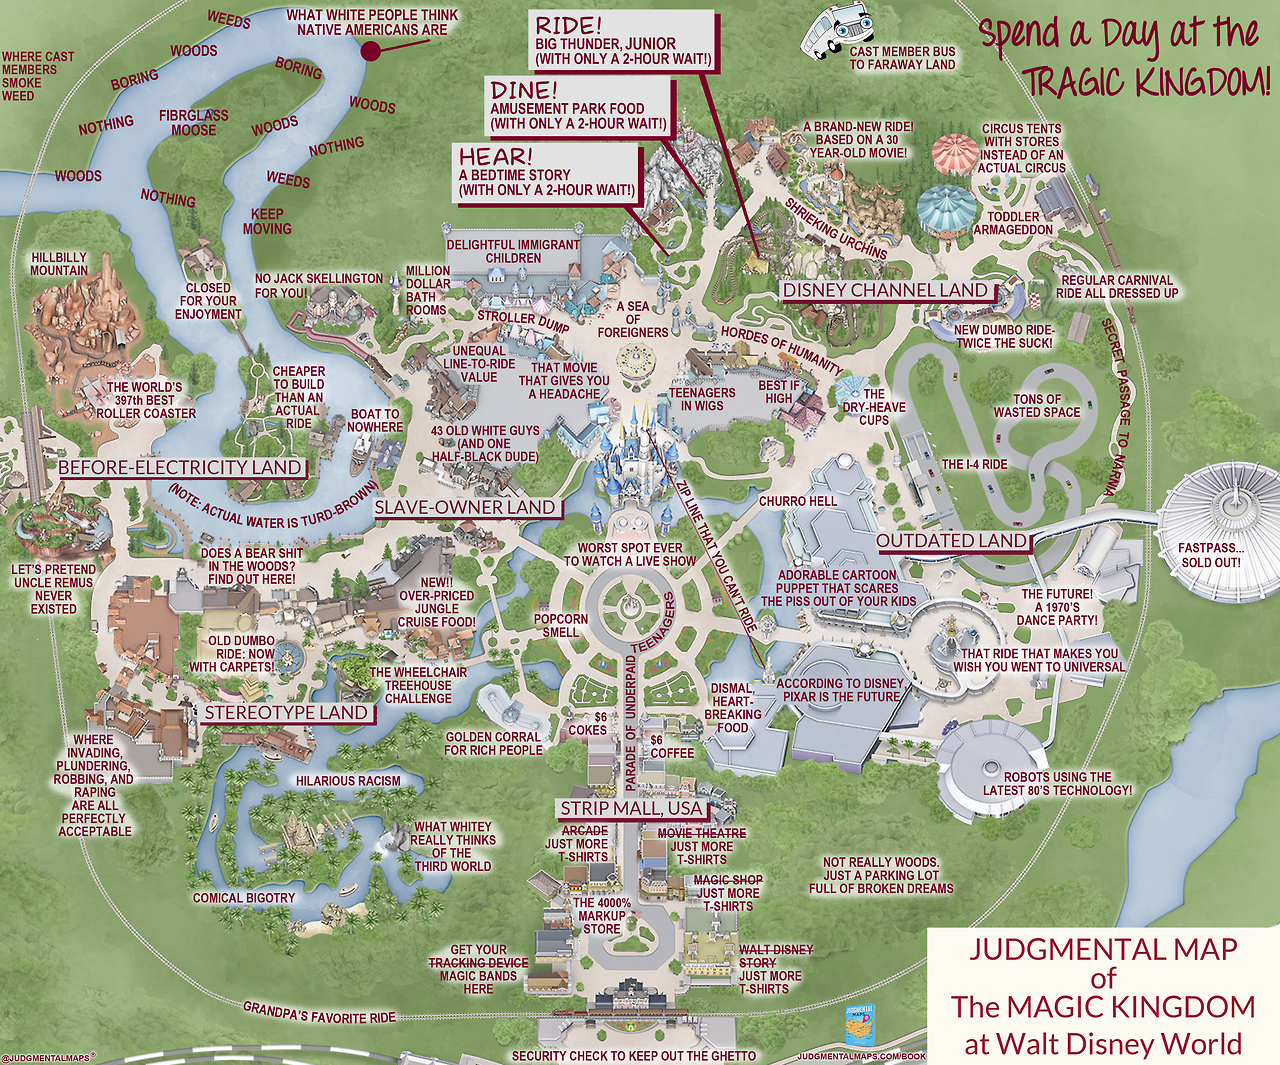 This 'Judgmental Map' of Magic Kingdom is pretty accurate | Blogs